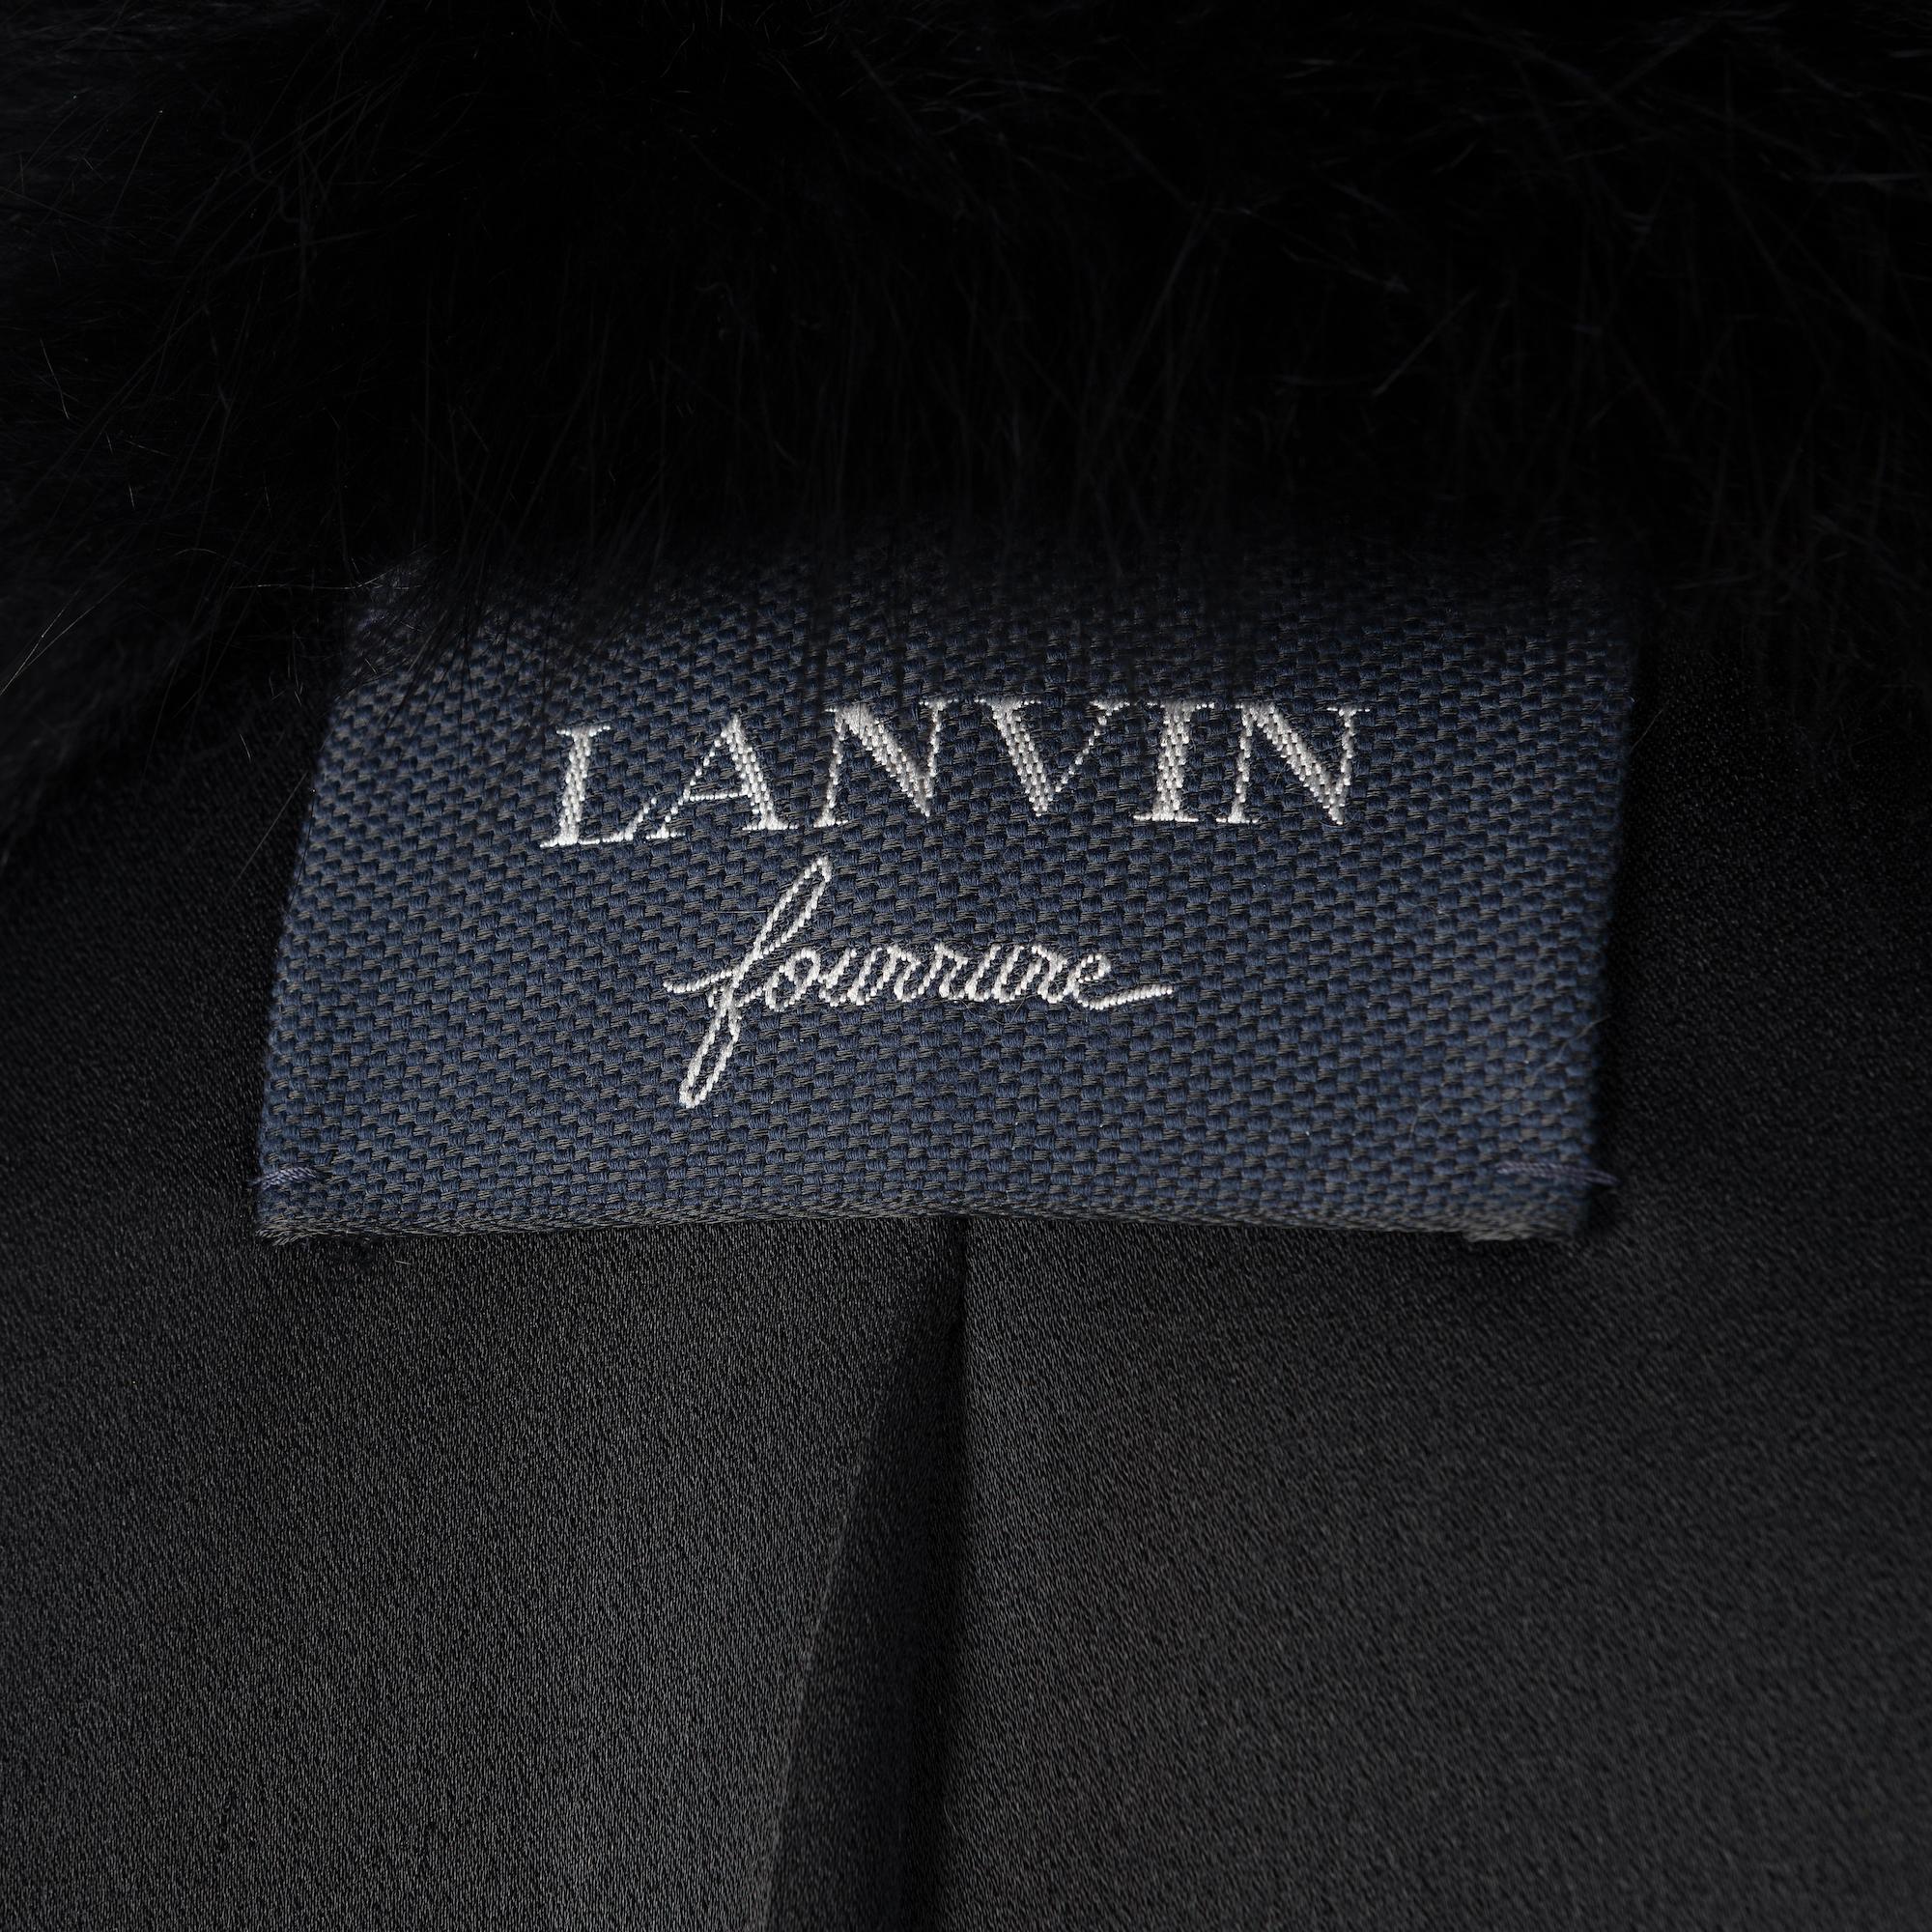 Lanvin Animal Print Fur Collared Coat In Excellent Condition For Sale In London, GB